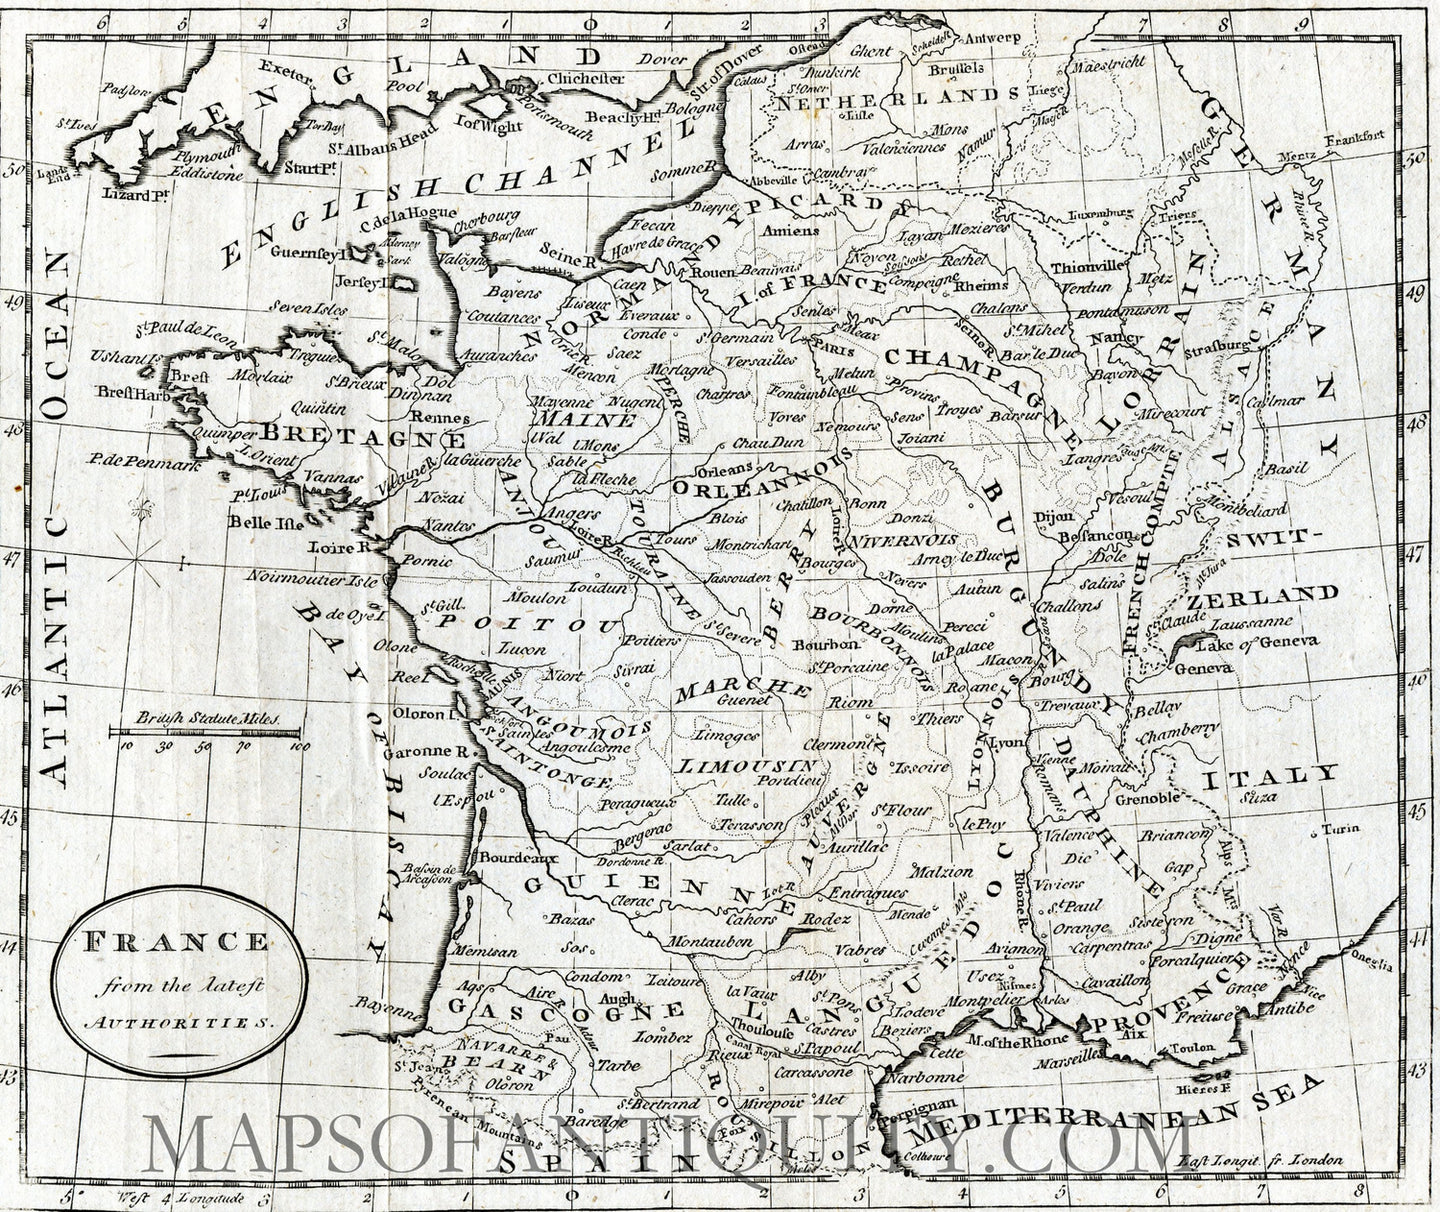 Black-and-white-antique-map-France-from-the-Best-Authorities-Europe-France-c.-1787-Guthrie-Maps-Of-Antiquity